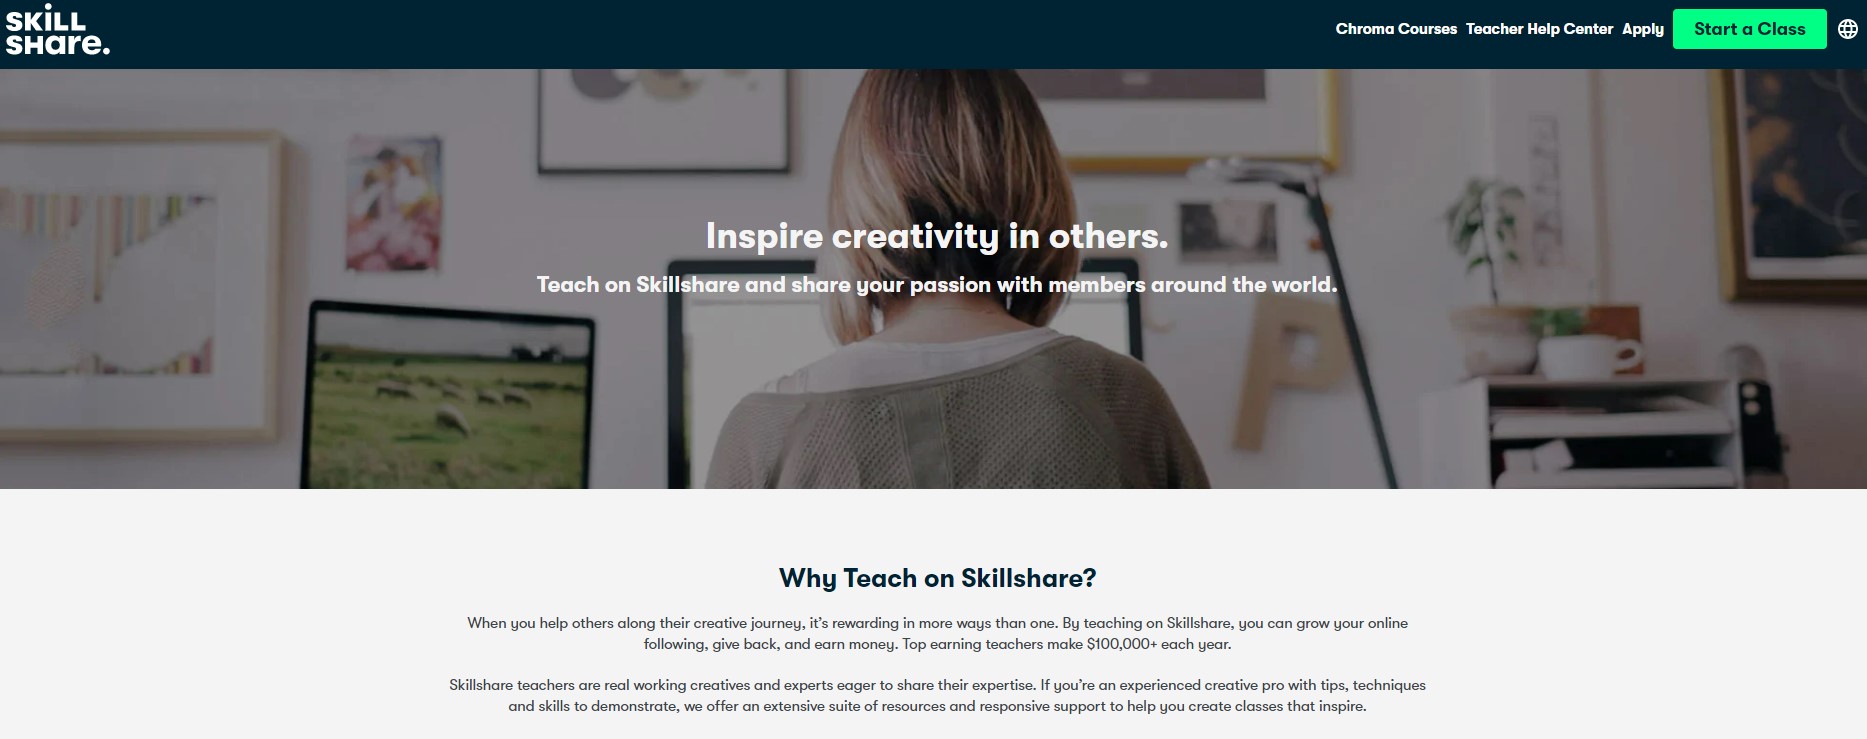 Skillshare is a web platform that offers online courses through a subscription system. It is also one of the most successful online training sites globally.